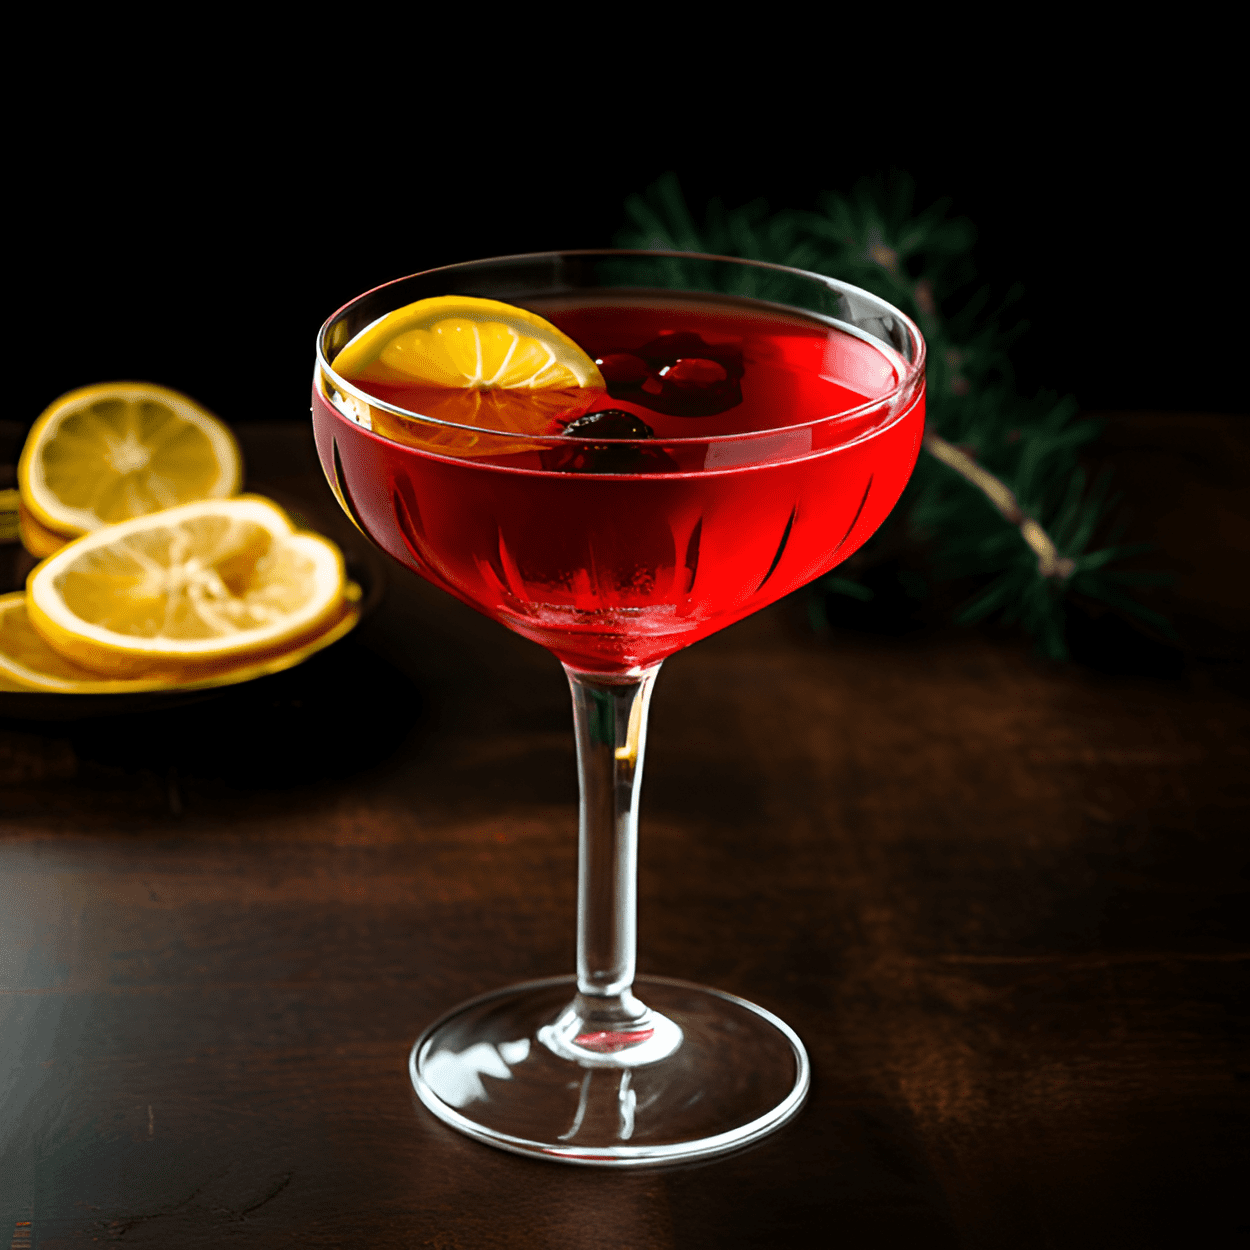 Ruby Port Cocktail Recipe - The Ruby Port Cocktail is a rich, fruity, and slightly sweet drink. It has a deep, ruby red color and a full-bodied flavor that is both robust and smooth. The sweetness of the Port wine is balanced by the tartness of the lemon juice, making it a well-rounded and satisfying cocktail.